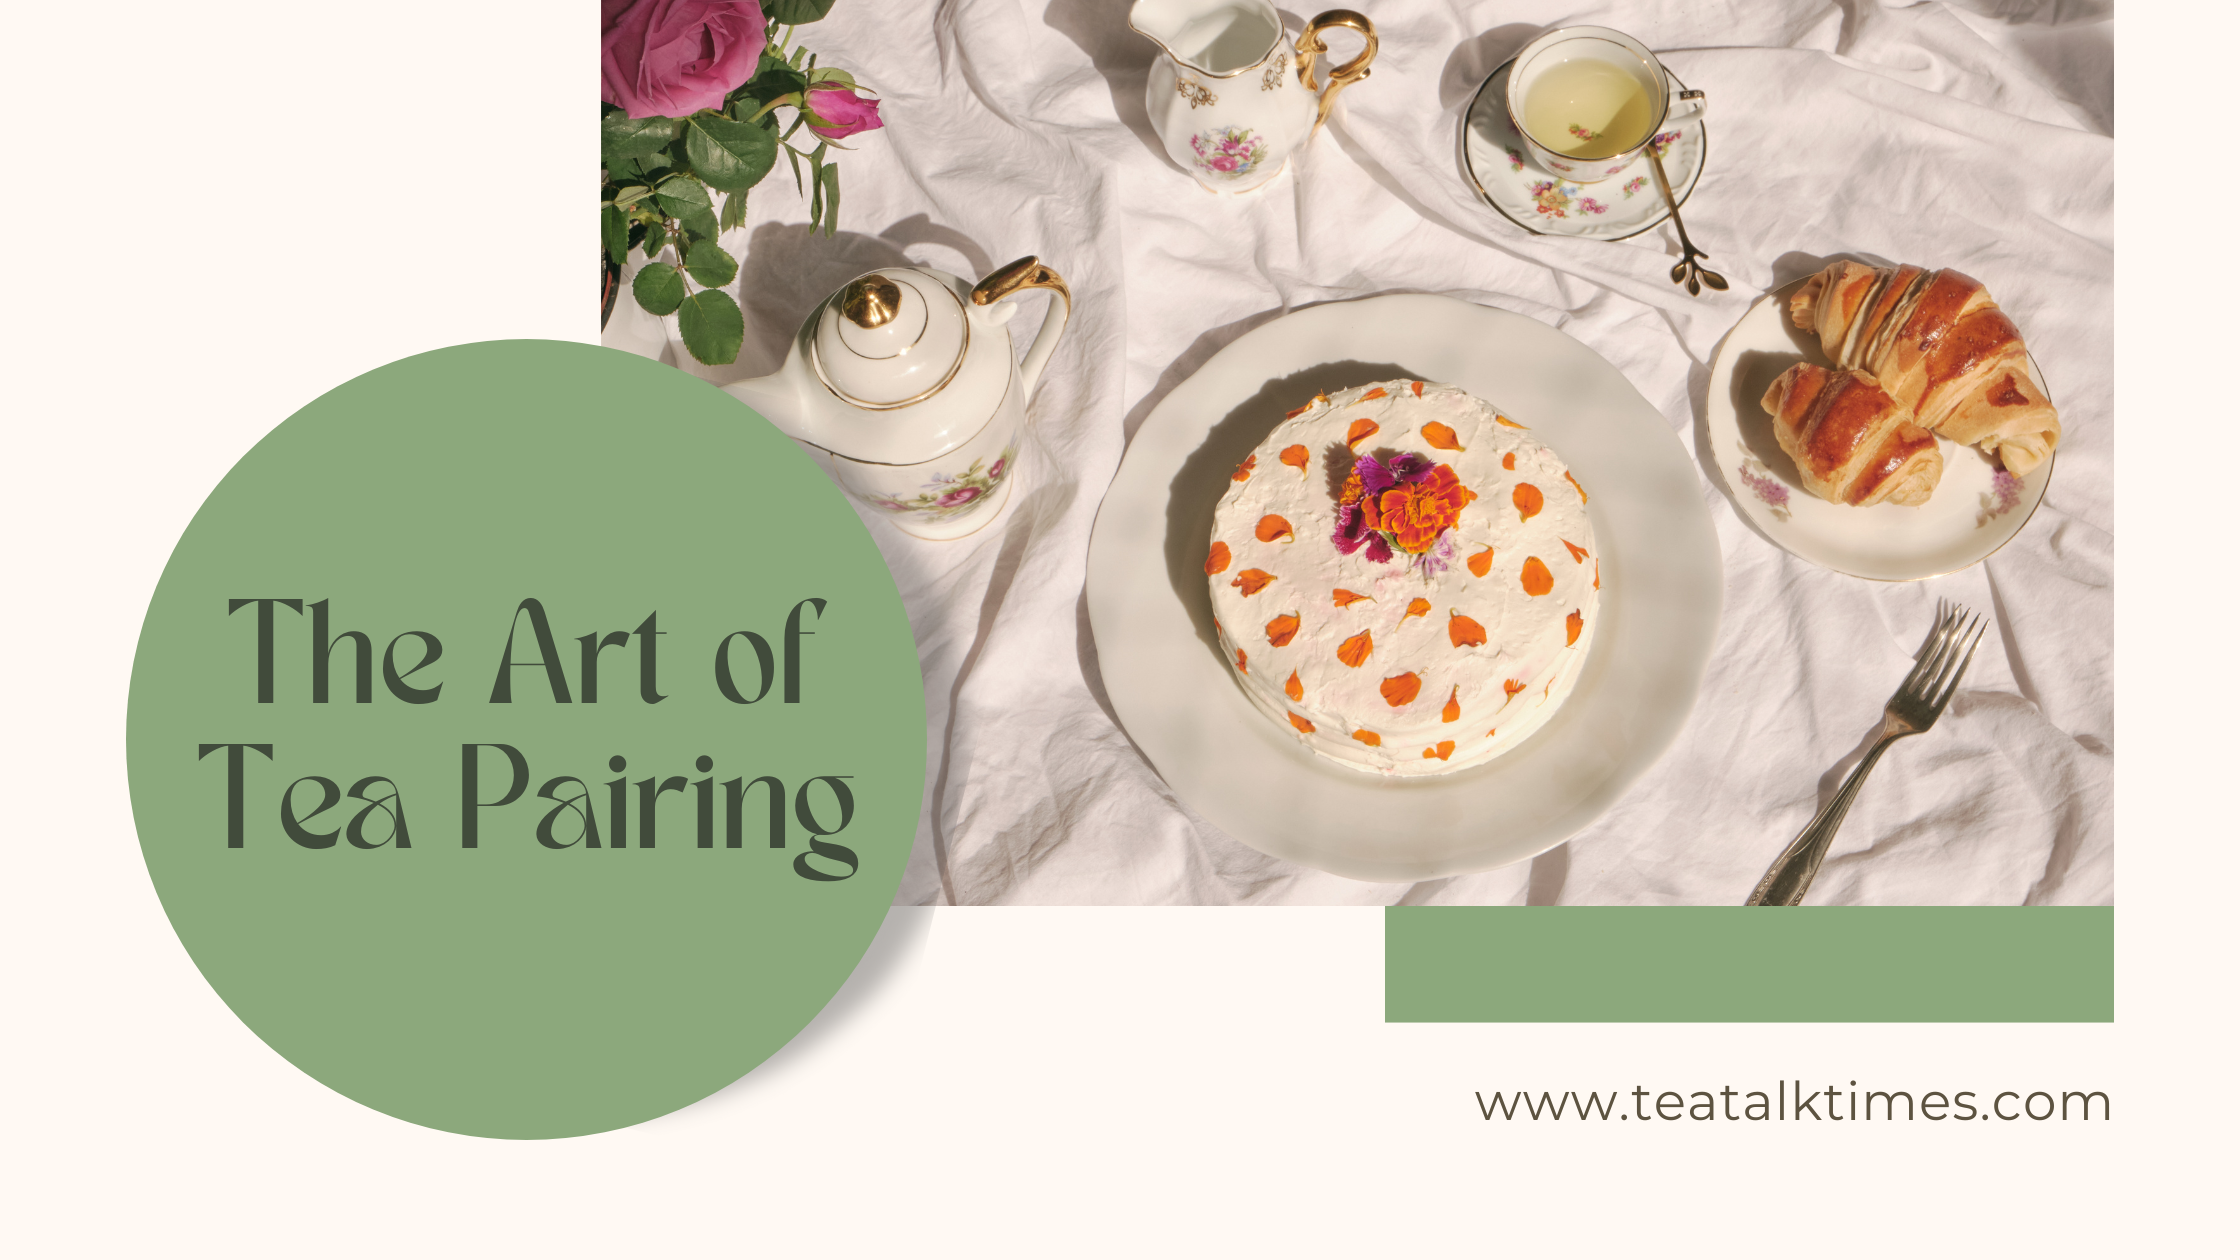 The Art of Tea Pairing: Matching Teas with Meals